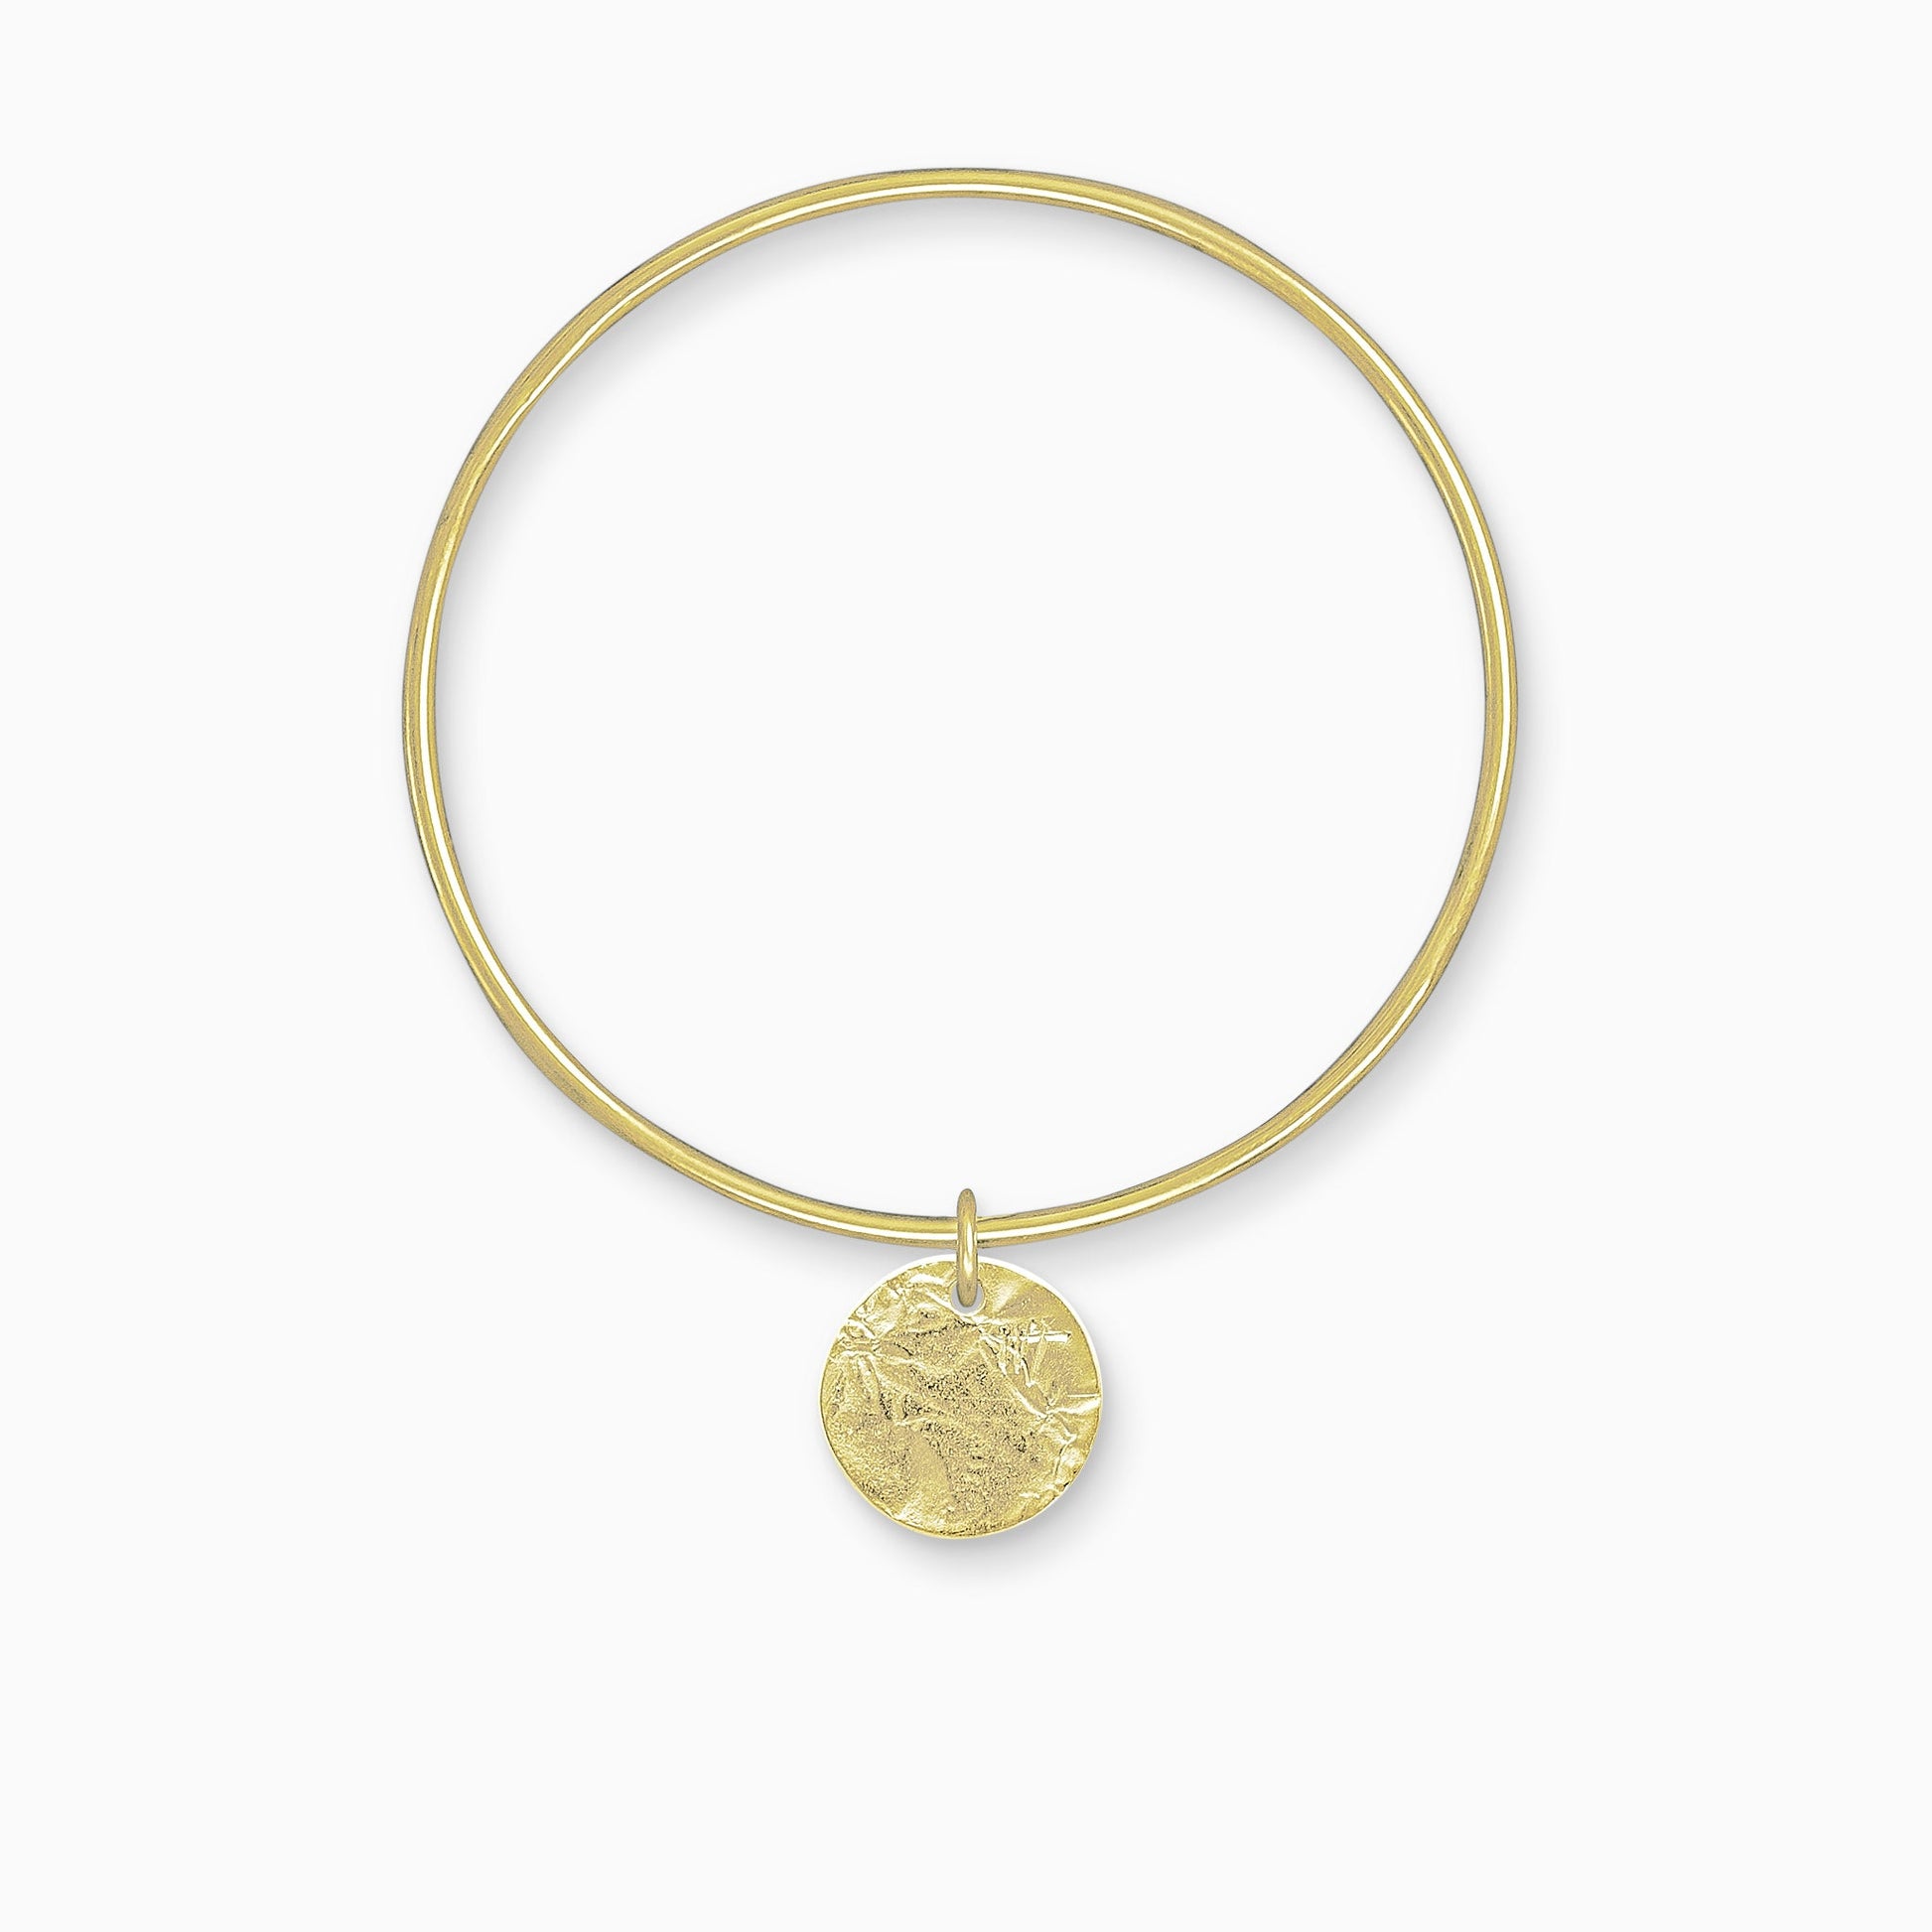 An 18ct Fairtrade yellow gold textured, circular, flat disc charm freely moving on a round wire bangle. Charm 17mm. Bangle 63mm inside diameter x 2mm round wire.